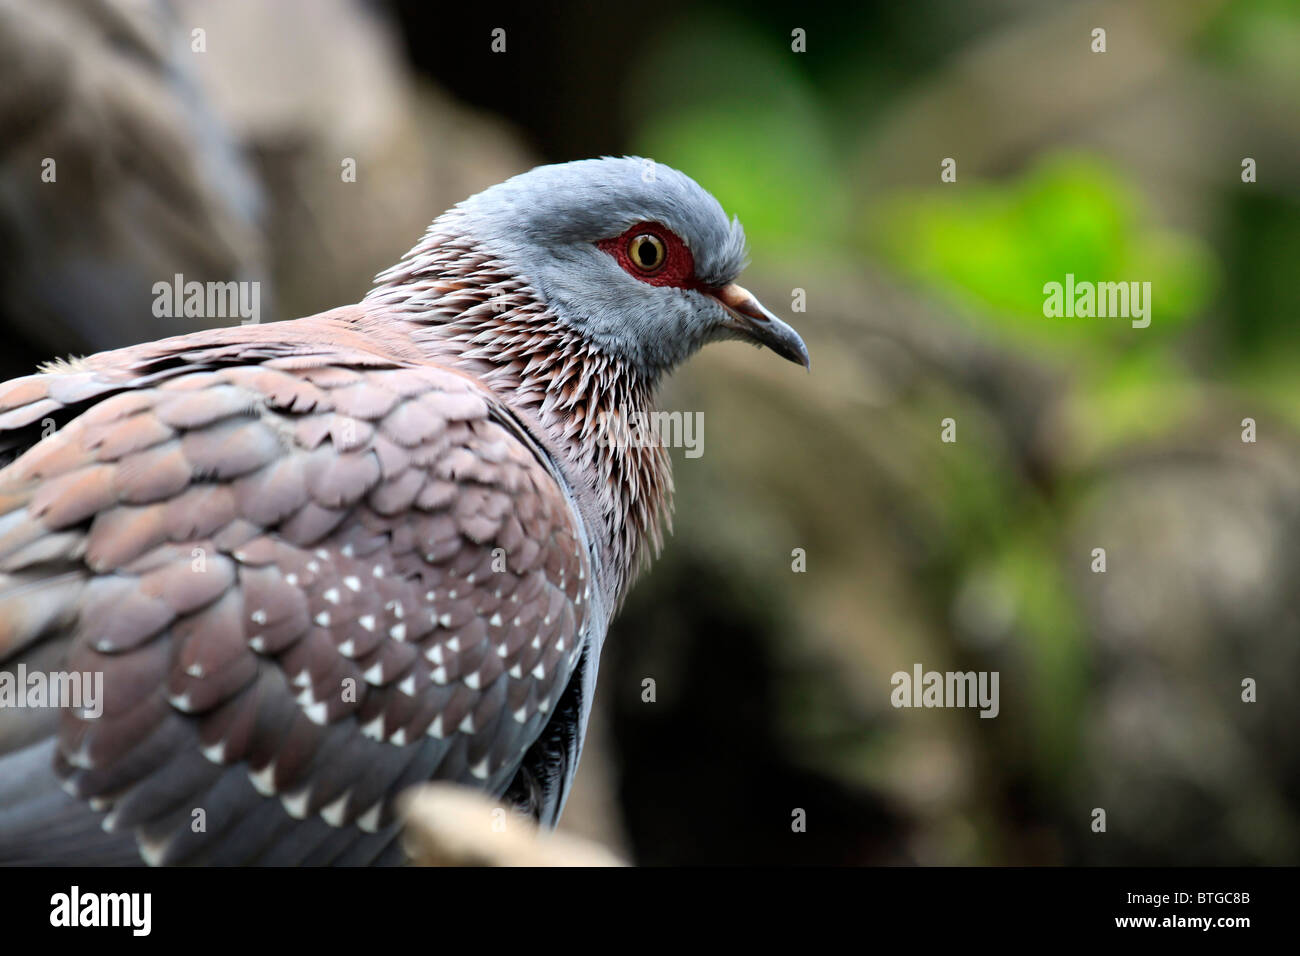 Speckled pigeon or African rock pigeon,( Columba guinea) in World of Birds, Hout Bay, South Africa. Stock Photo